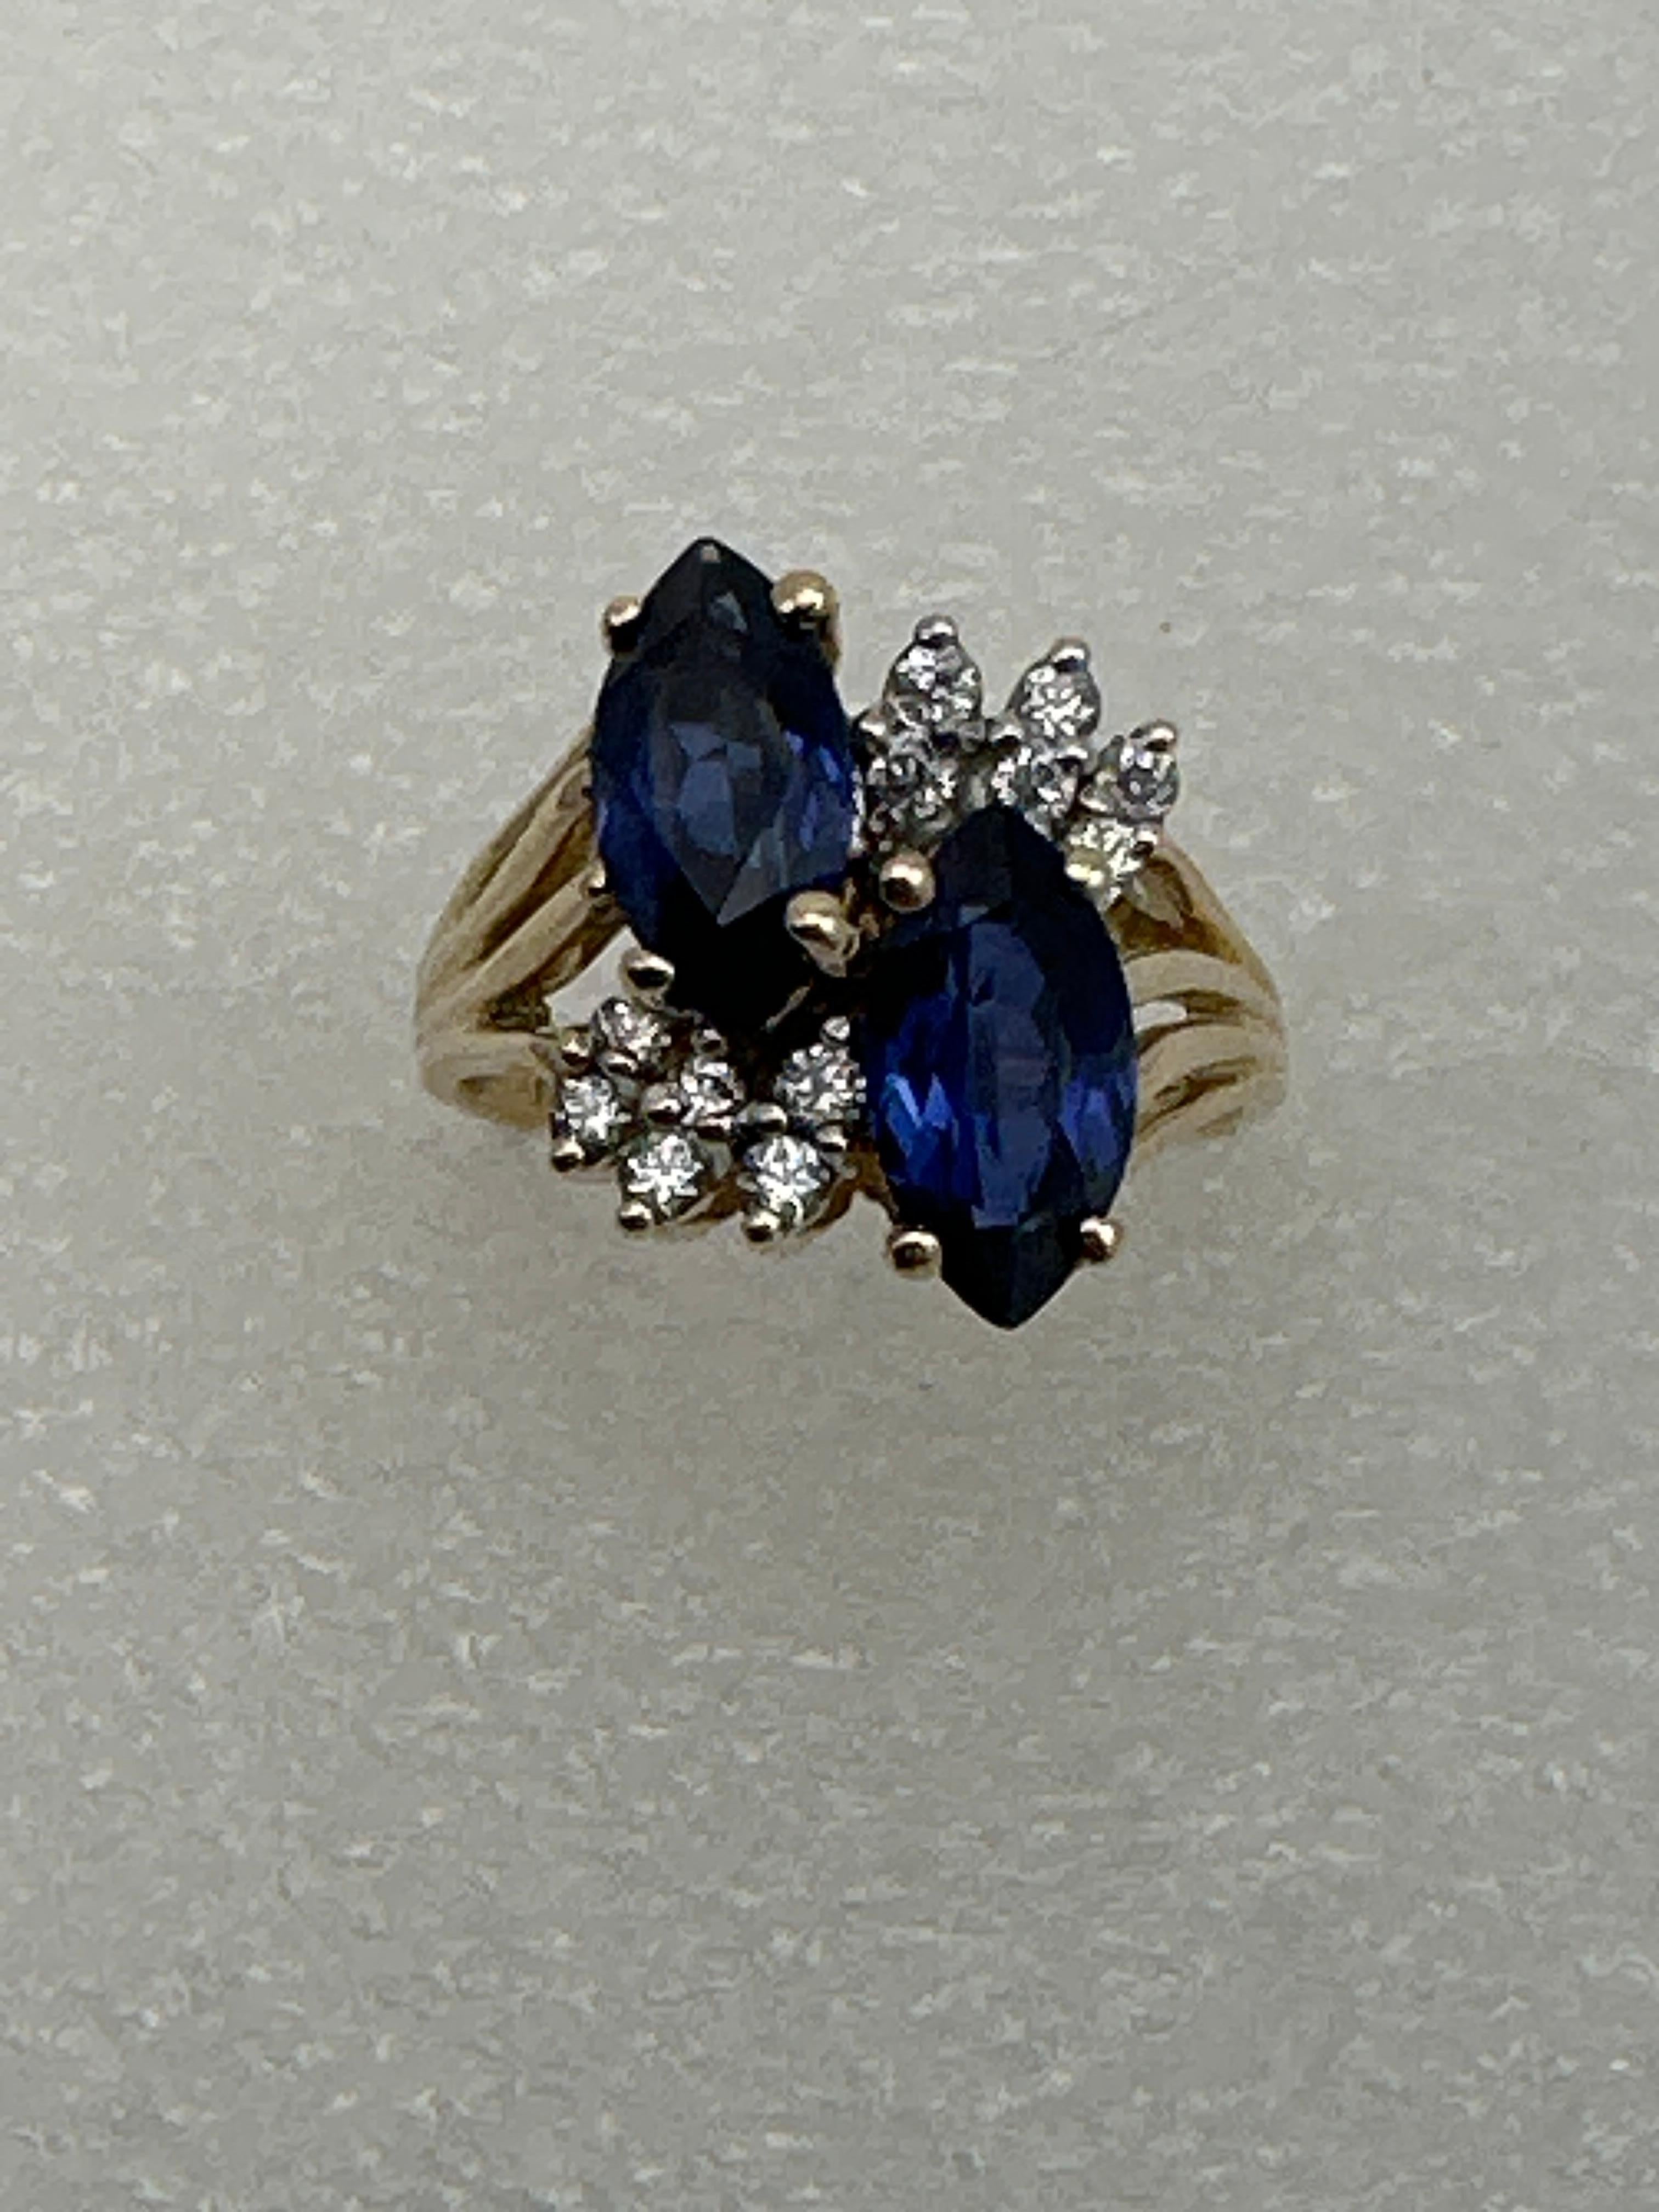 14kt Yellow Gold ~ 2 Sapphire Blue Marquise Stones 12 round Diamond Ring Size 6 1/2
Marquise sapphires measure approx 5mm x 10mm absolutely beautiful stones 
12 round Diamonds measure approx 2mm

Sapphire is the birthstone for the month of September